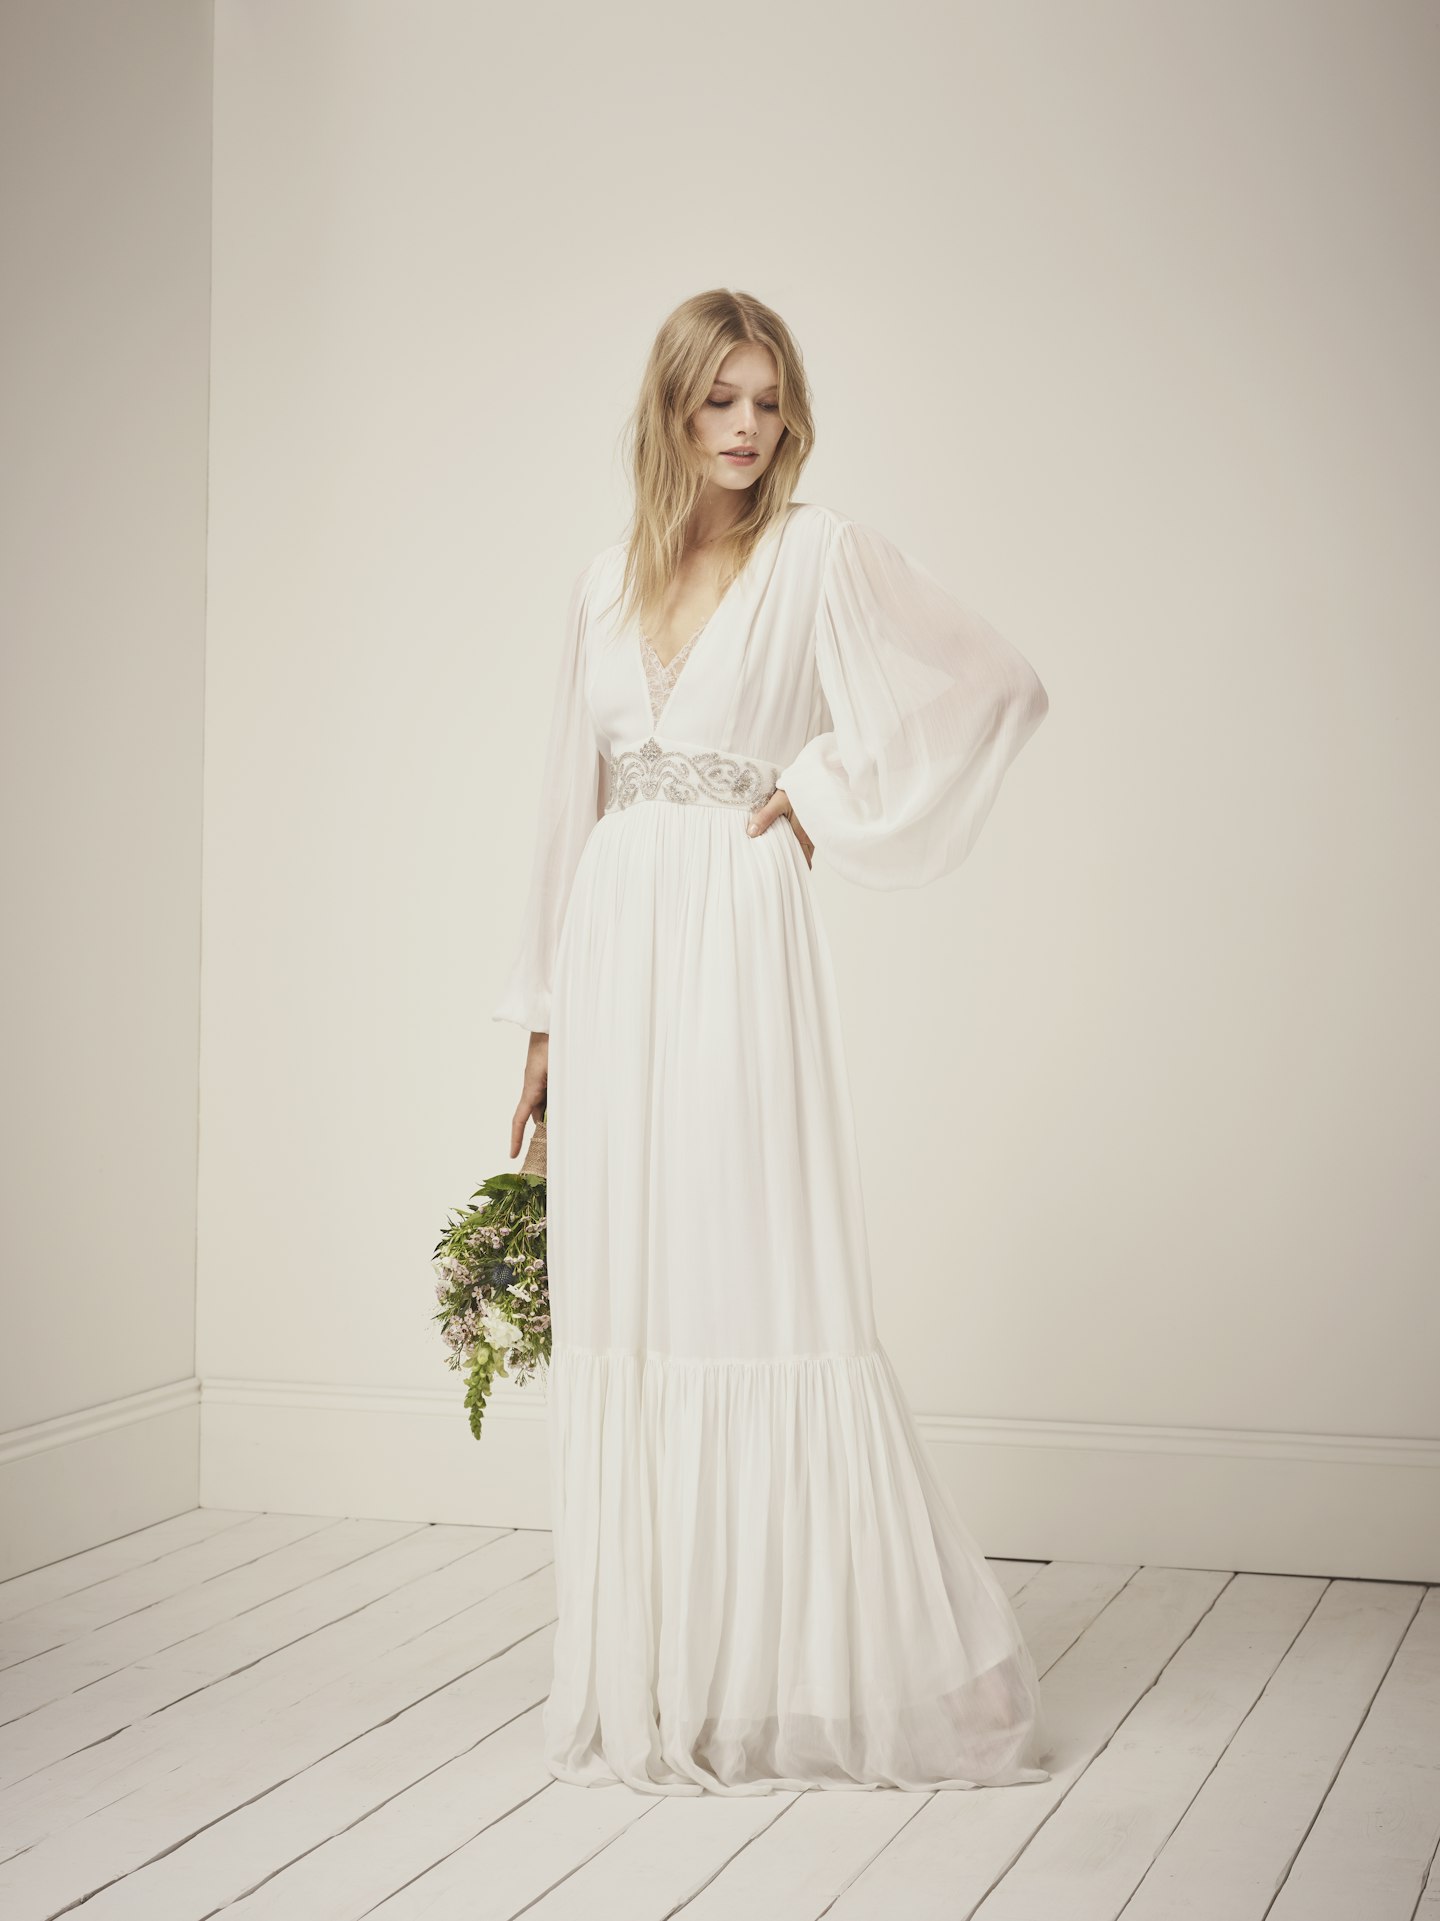 French connection wedding dress